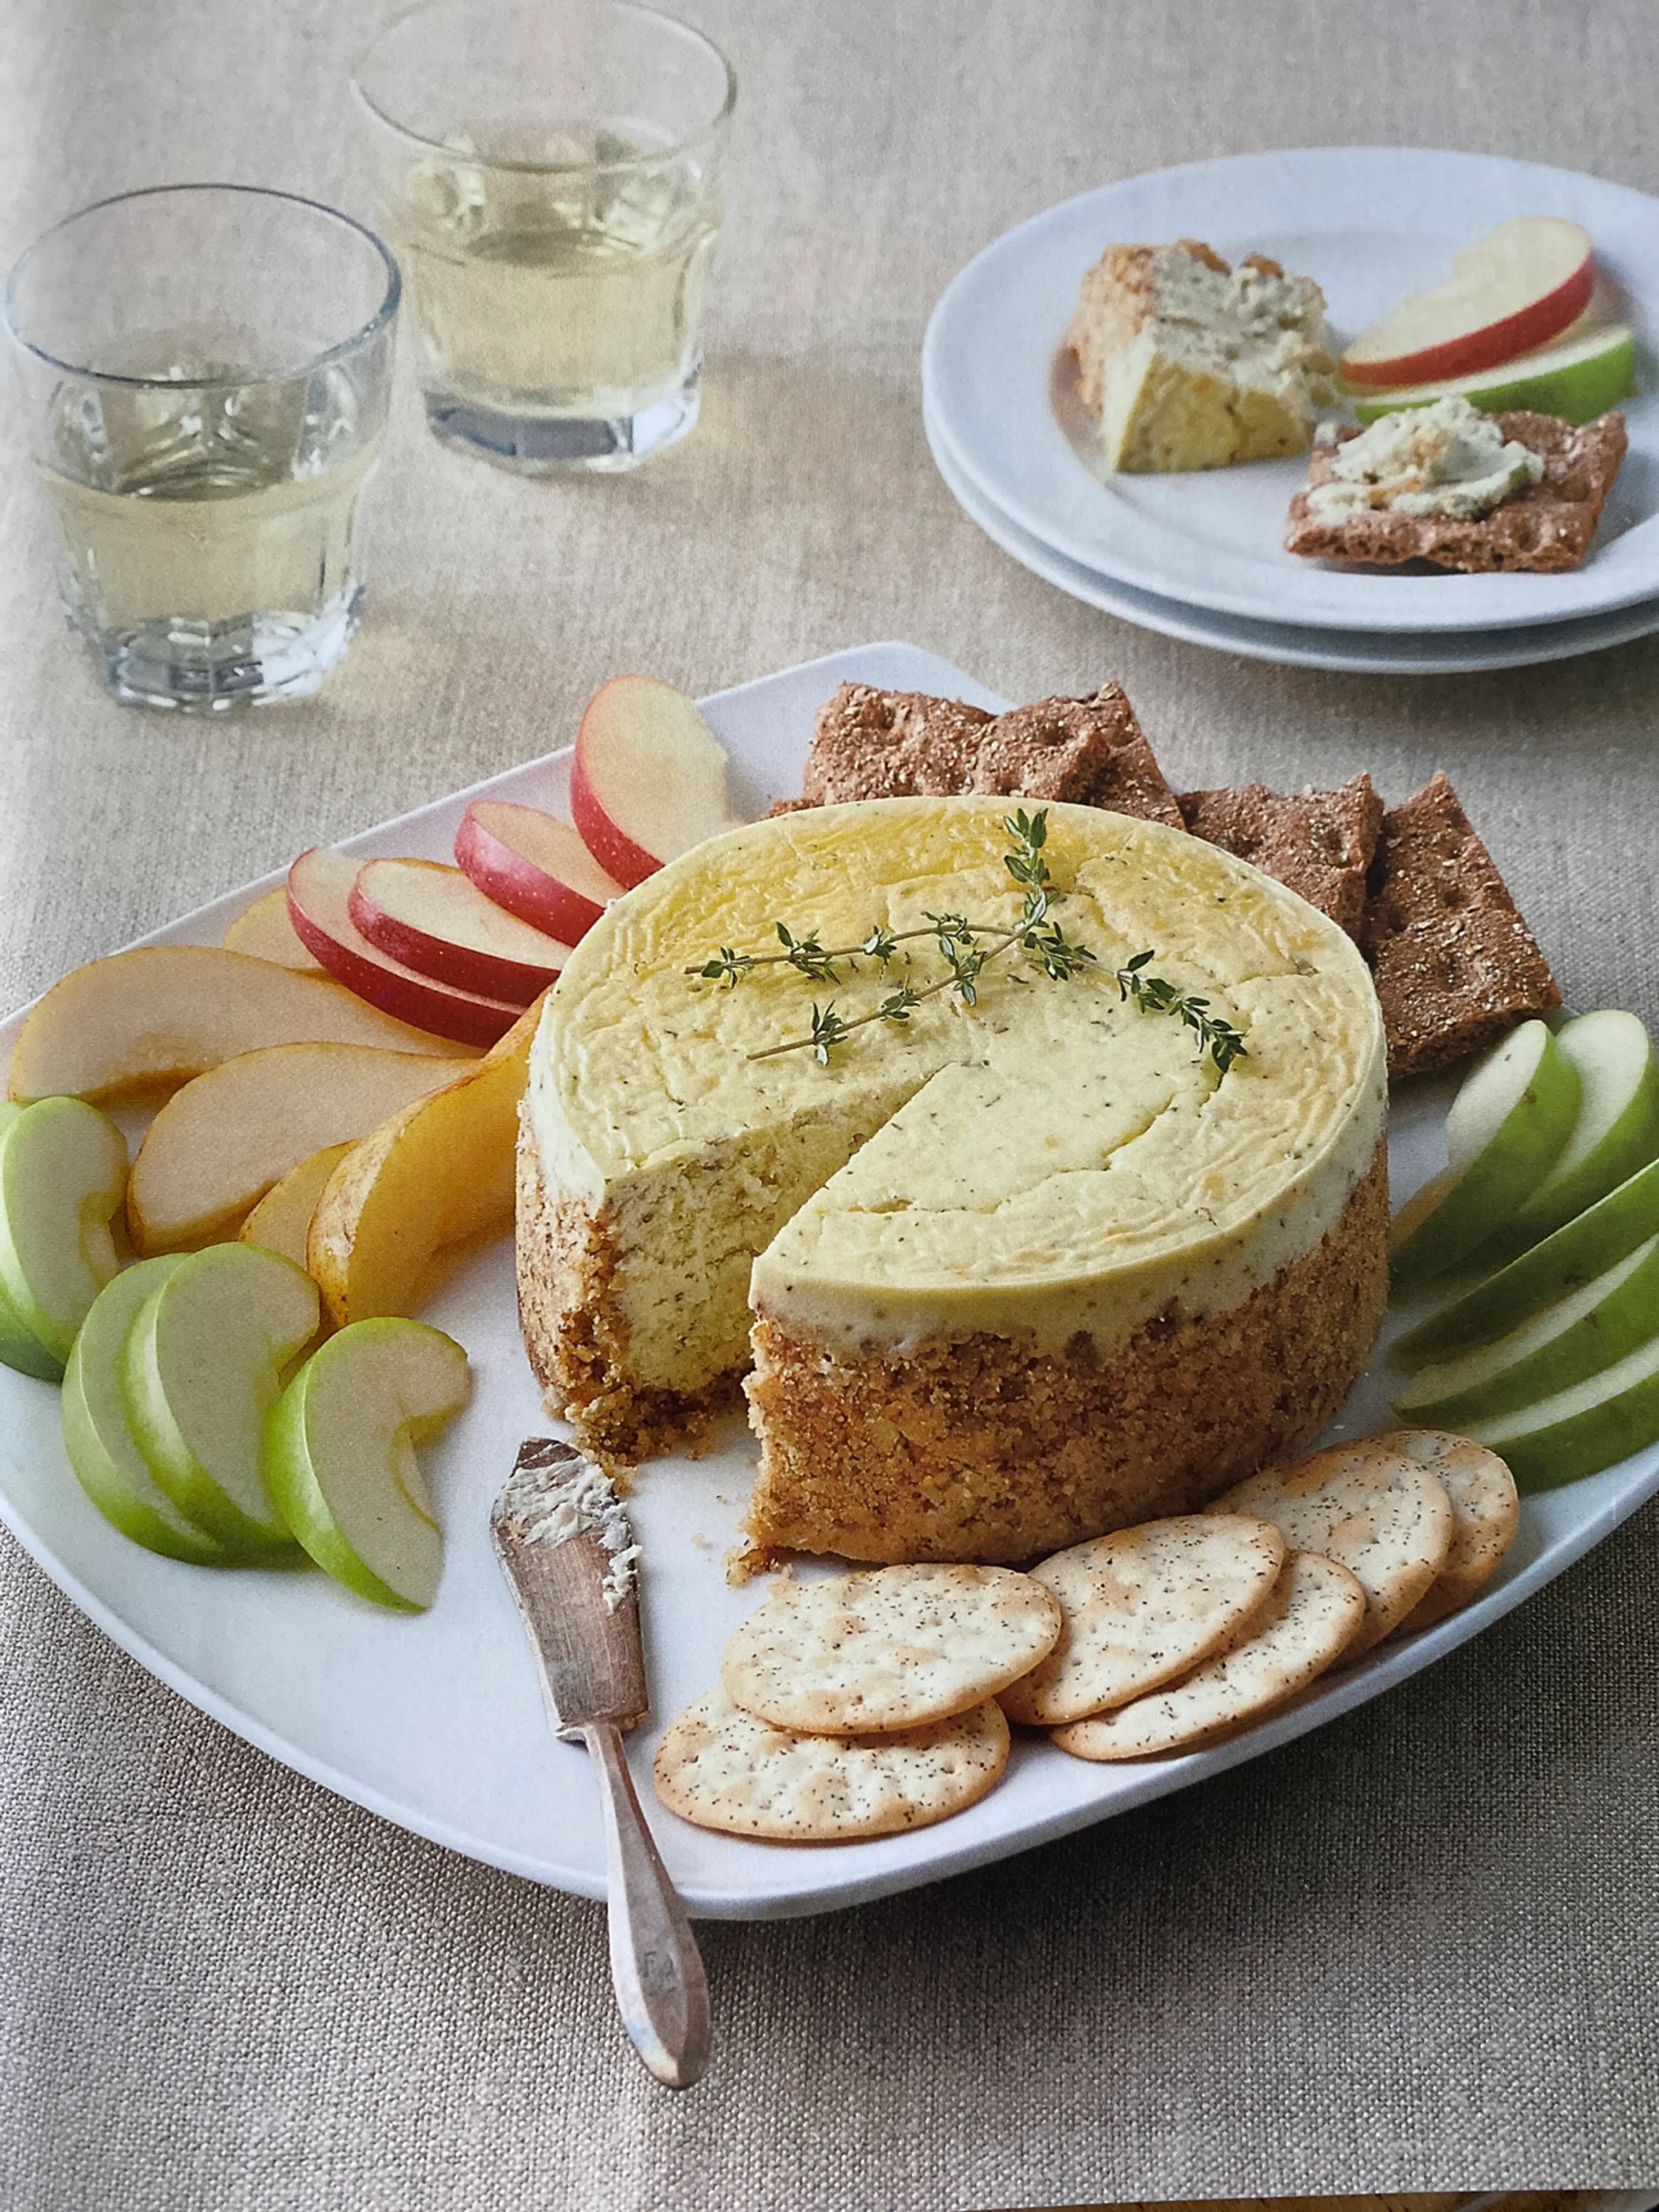 Savory Blue Cheese Appetizer Cheesecake